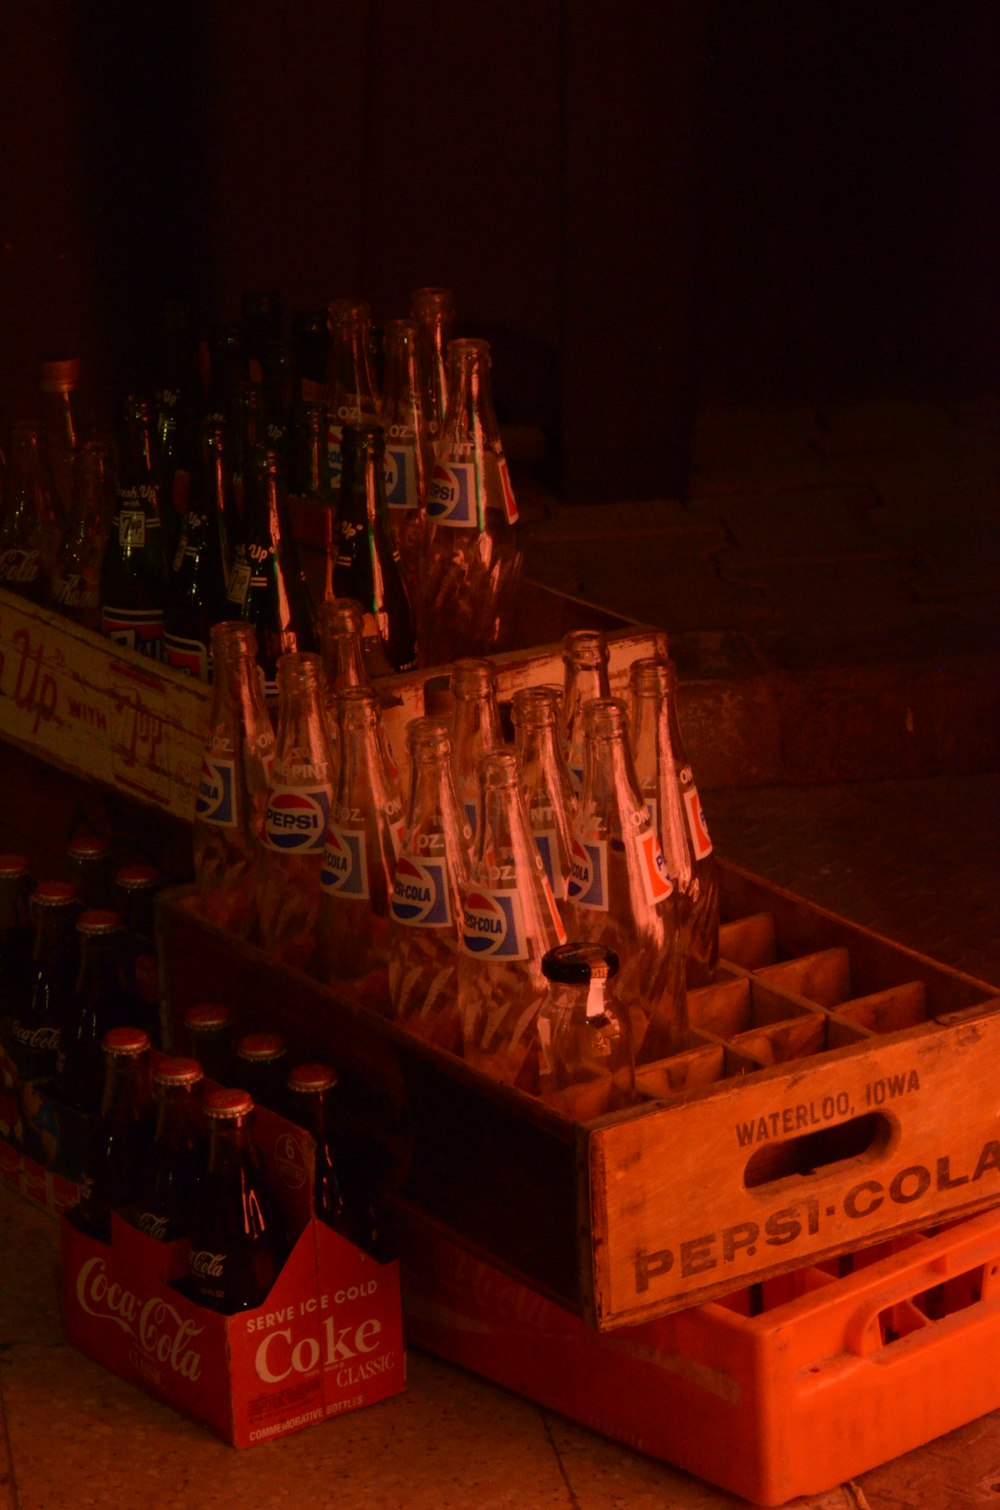 clear glass bottles on brown wooden crate